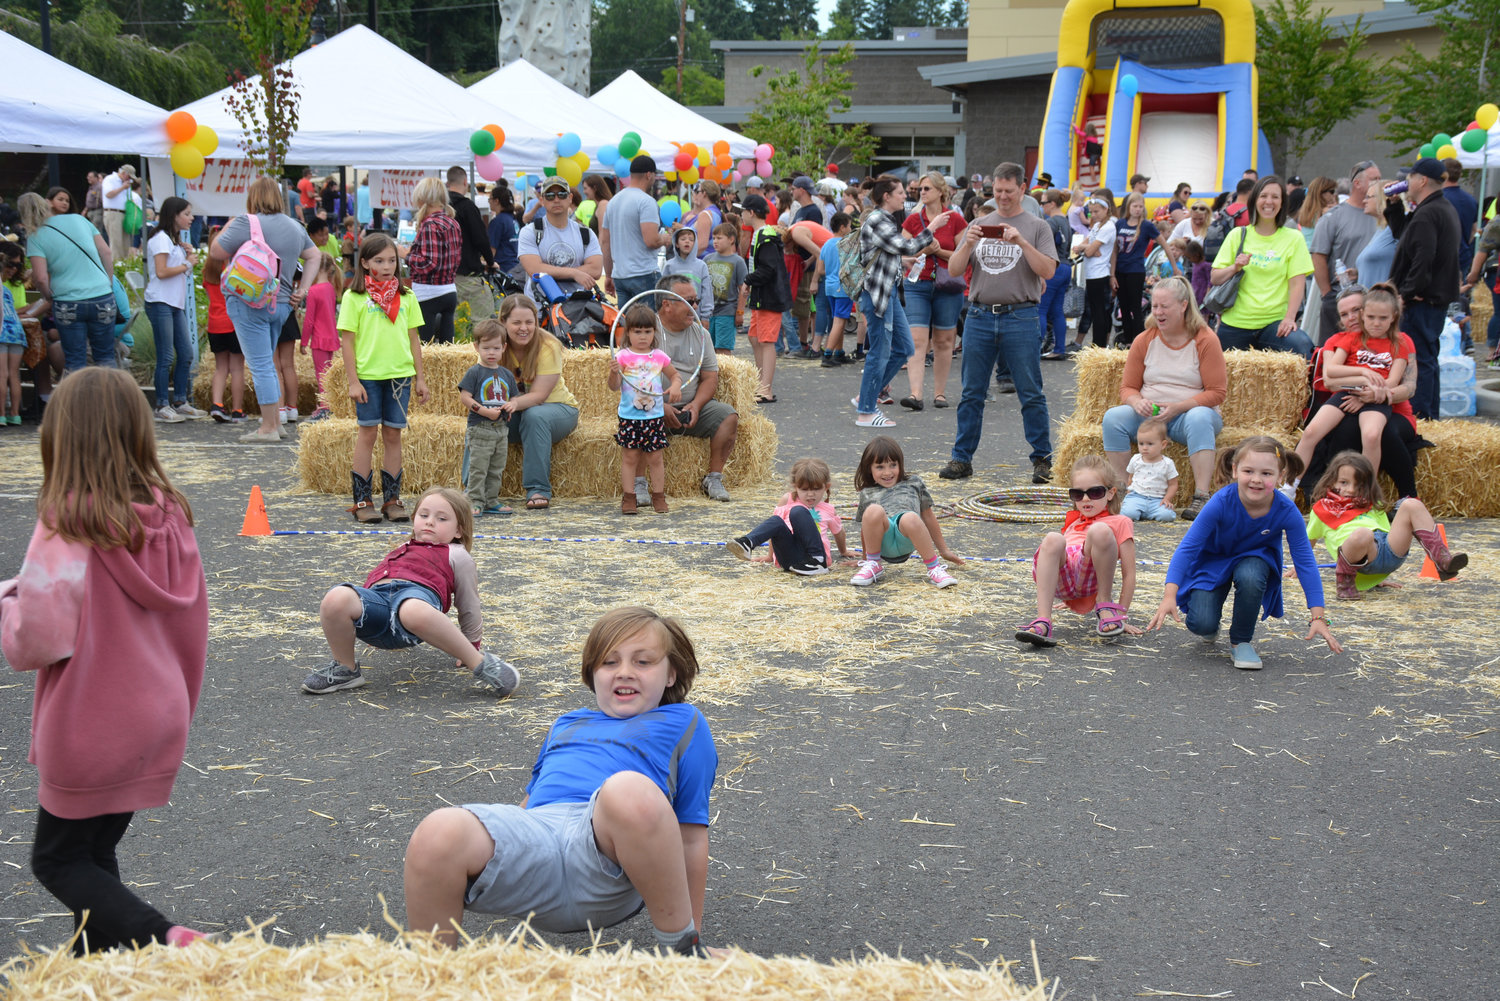 Kids at previous Yelm’s Prairie Days event take part in a crab-walking race.